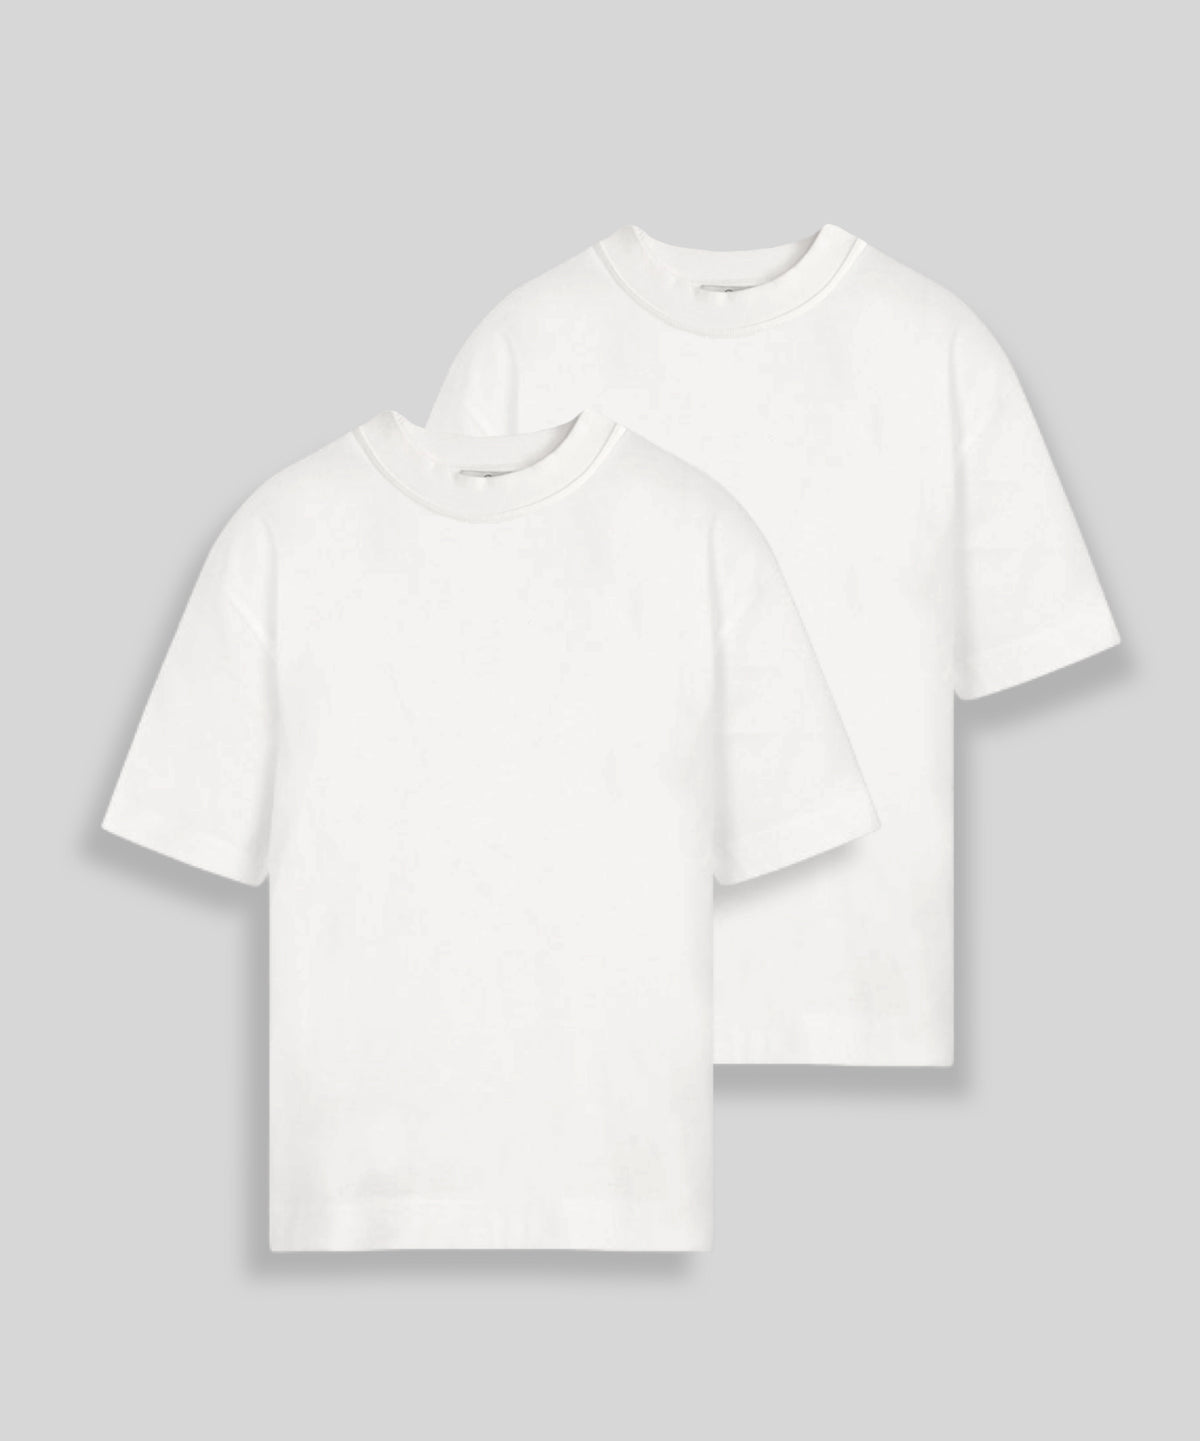 DOUBLE-PACK COMFORT T-SHIRT "T15" OFF-WHITE